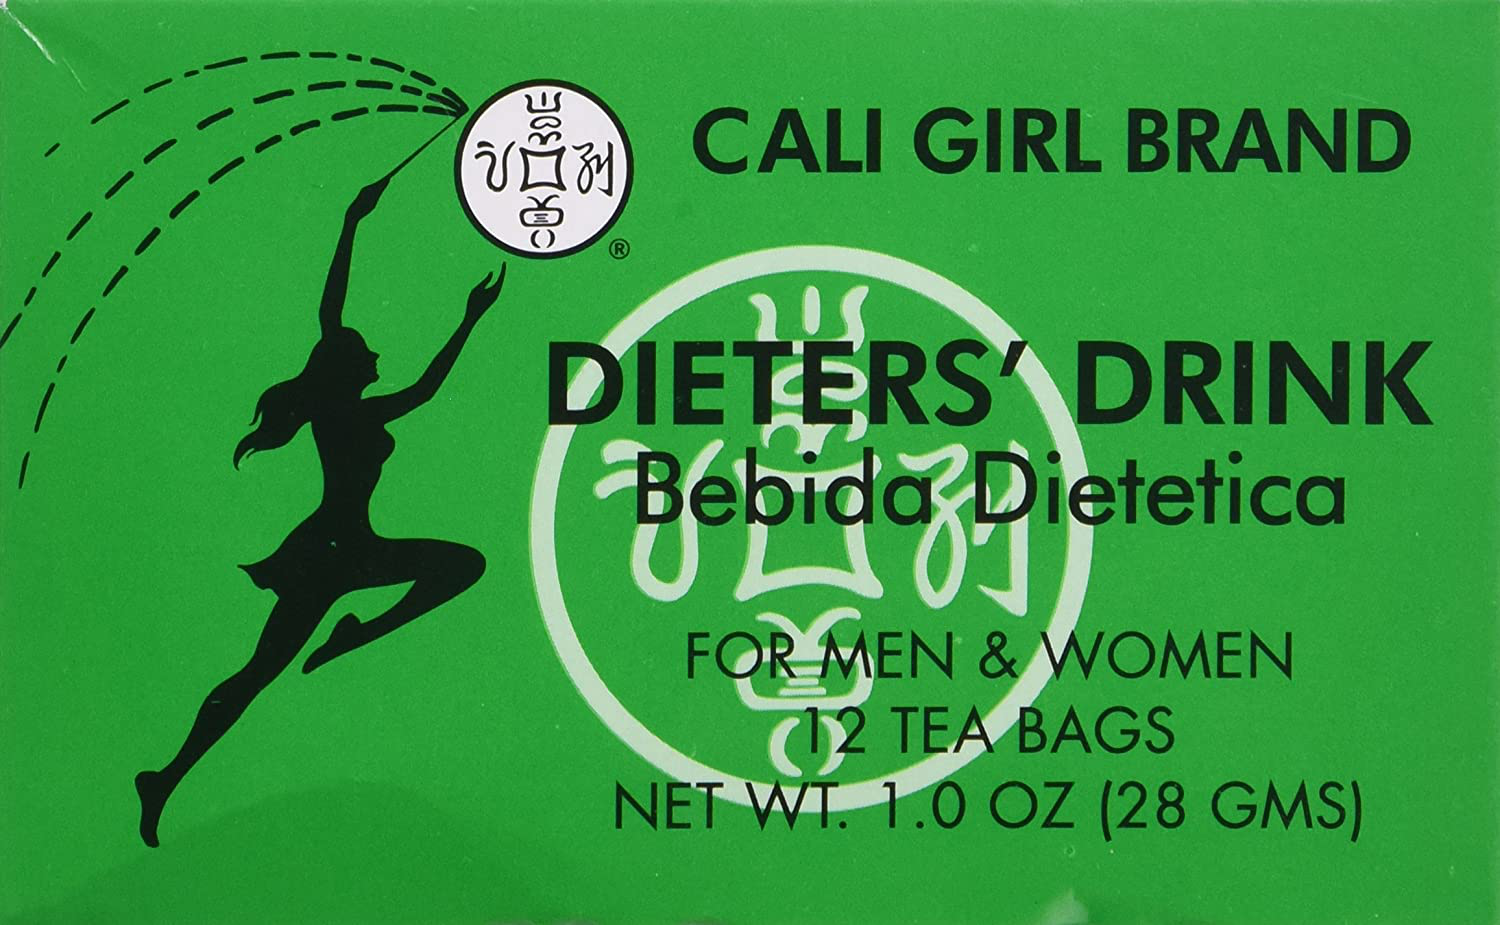 Dieter's Drink Cali Girl Brand for Men and Woman NT WT 1.0oz